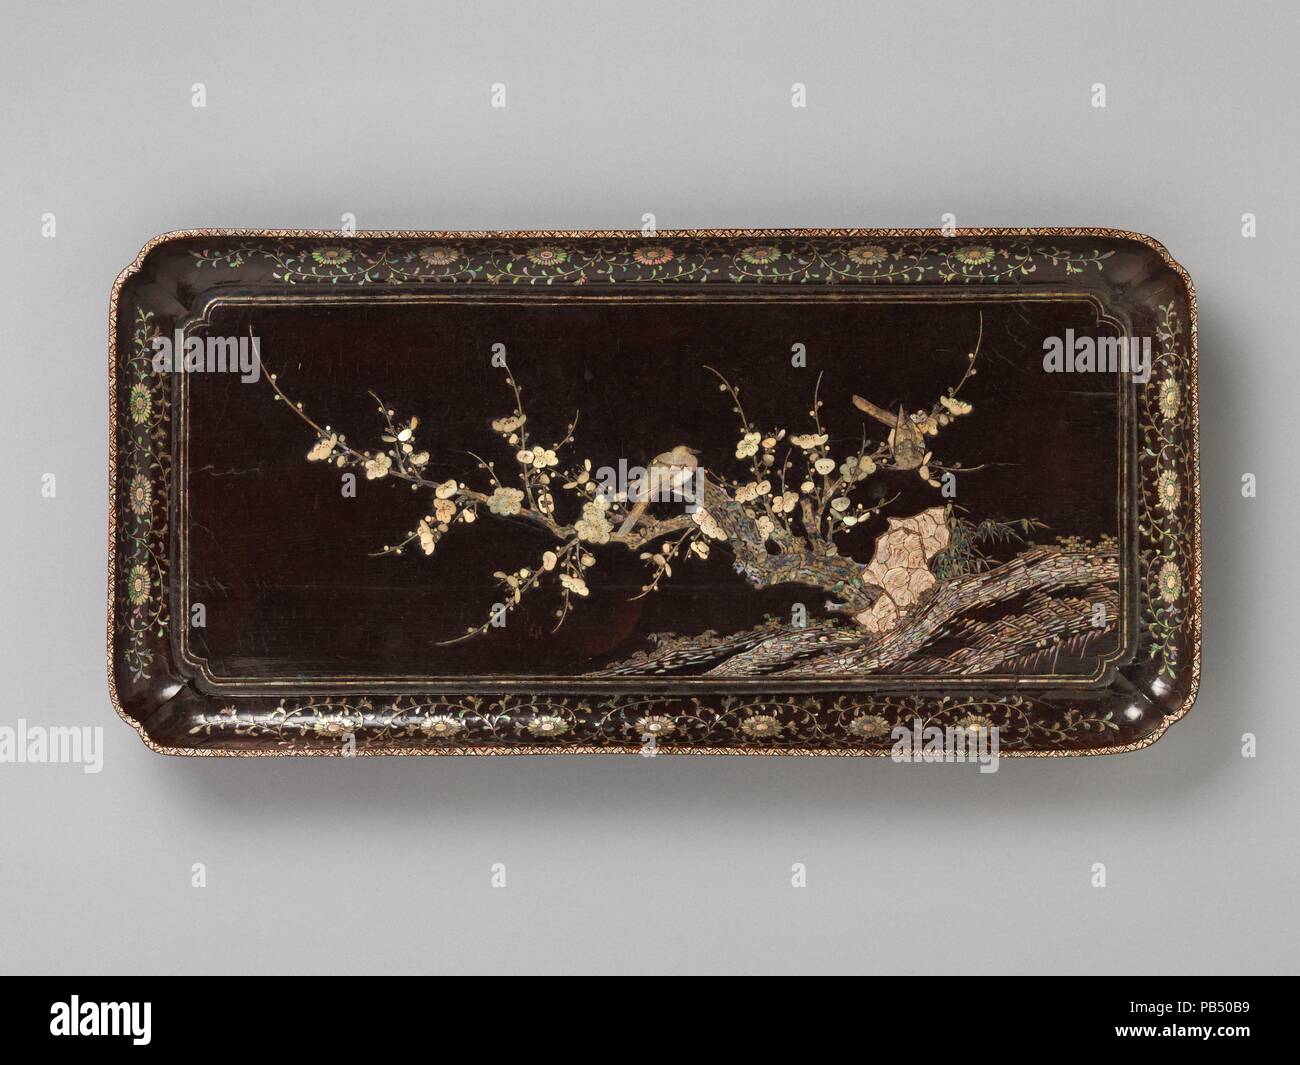 Tray with Flowering Plum and Birds. Culture: China. Dimensions: H. 1 3/4 in. (4.4 cm); W. 11 3/4 in. (29.8 cm); L. 24 3/8 in. (61.9 cm). Date: late 14th century.  The wonderful flowering plum tree and two plump birds that fill the center of this tray illustrate the skillful manipulation of shapes and colors of the inlaid motherof-pearl to create a powerful, dramatic scene. Long narrow pieces of iridescent shell define the rock terrain, while irregular pieces form the clump of rocks in front of the trunk of the flowering plum. Fragments of mother-of-pearl create the craggy trunk of the ancient  Stock Photo